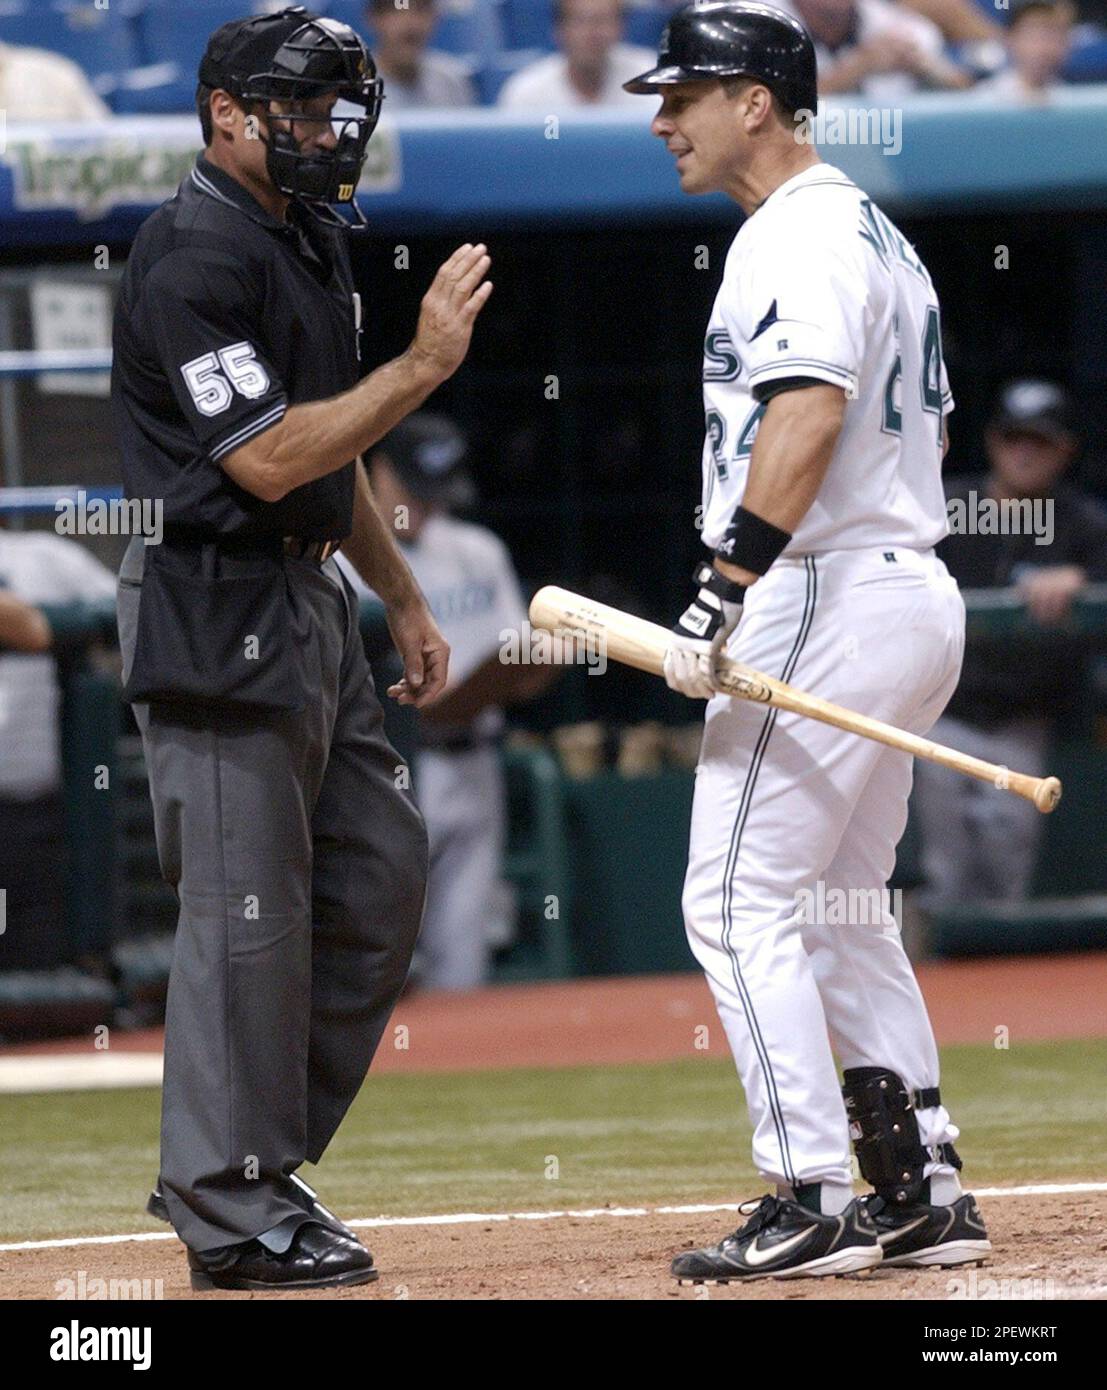 Tampa Bay Devil Rays' Tino Martinez, right, argues with umpire